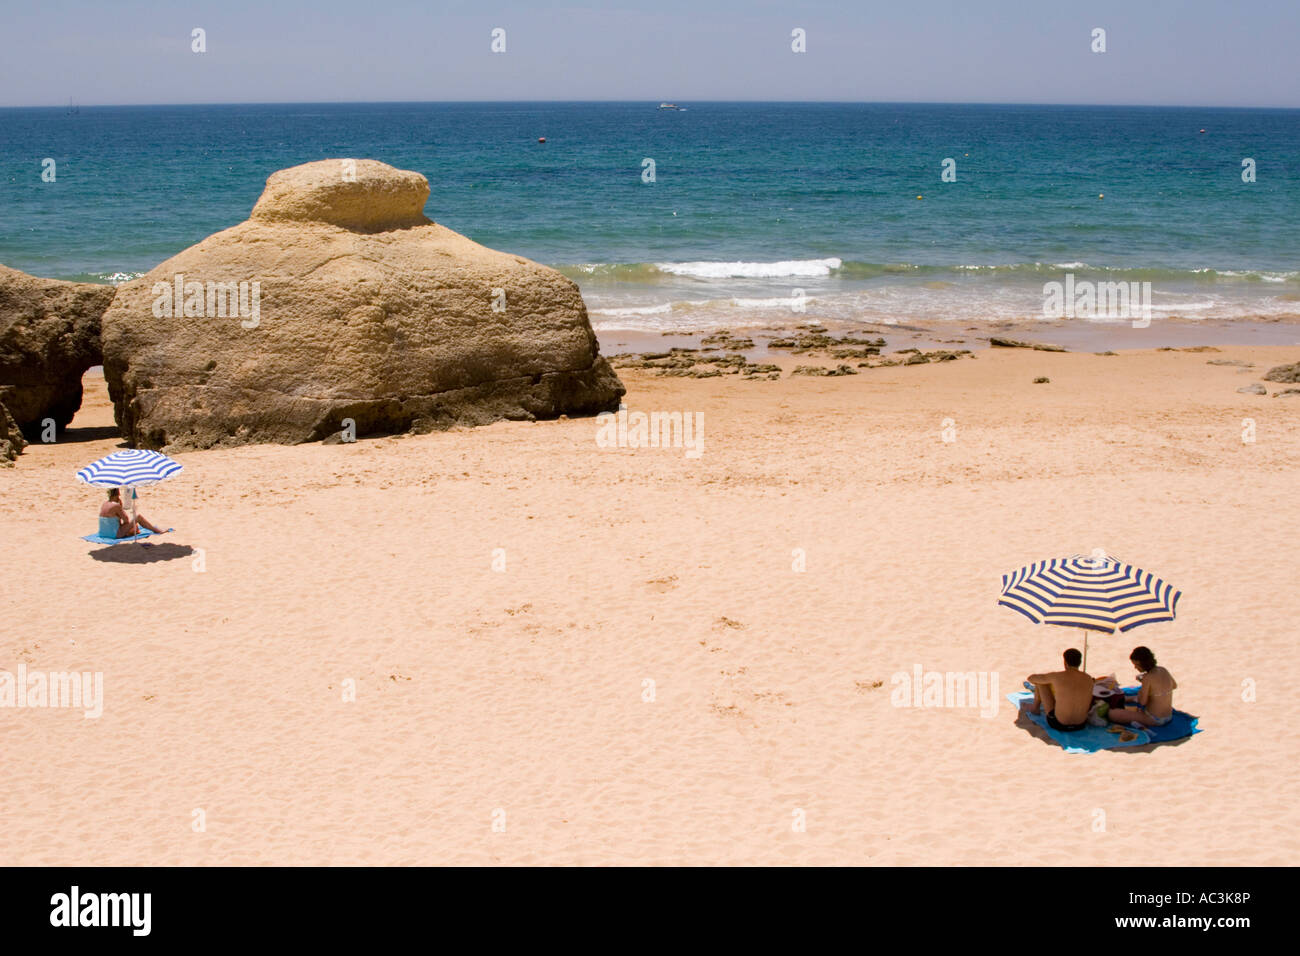 Family on beach sheltering under parasols on an almost deserted beach of Vale do Garrao in the Algarve Portugal. Stock Photo